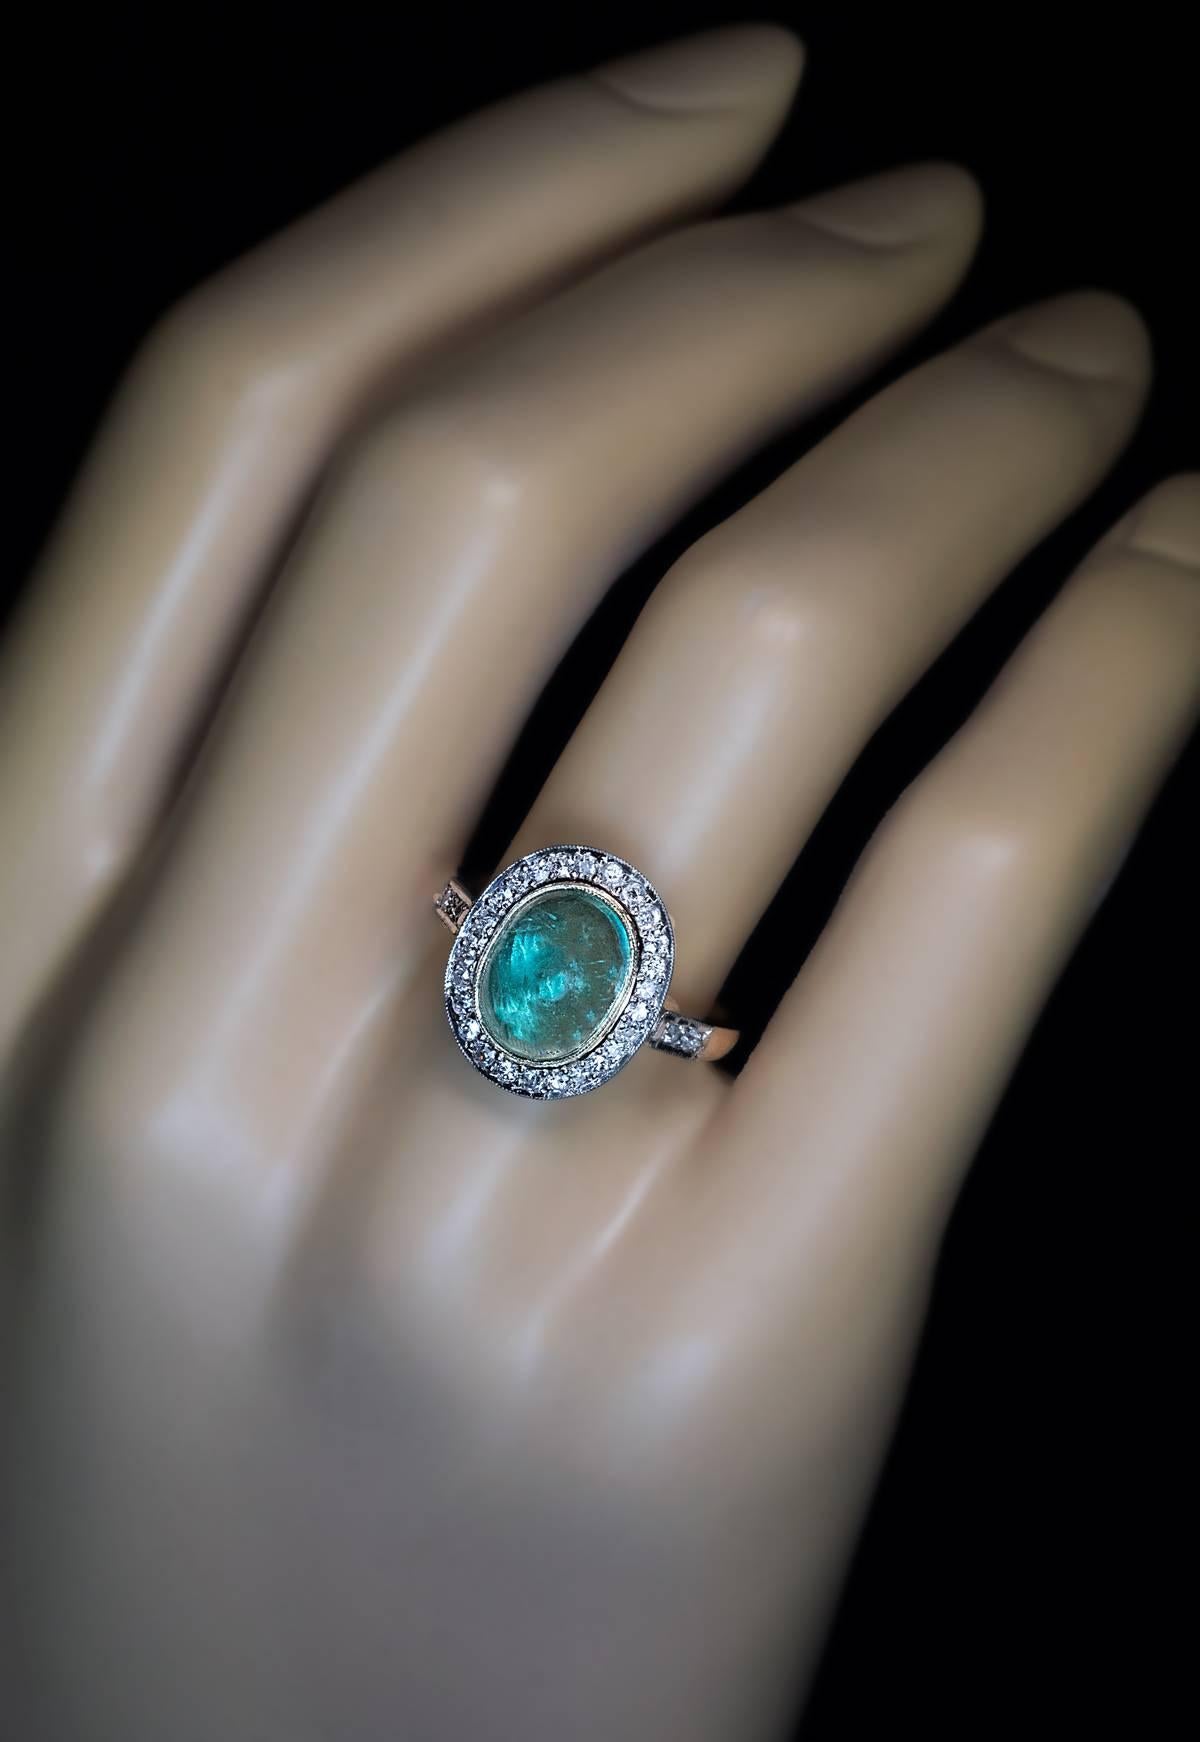 1950s
A vintage Russian ring is handcrafted in white, yellow, and rose 14K gold. The ring features a cabochon cut pale bluish-green emerald framed by old single cut diamonds.
The emerald measures 10.5 x 8 x 4.9 mm and is approximately 3.08